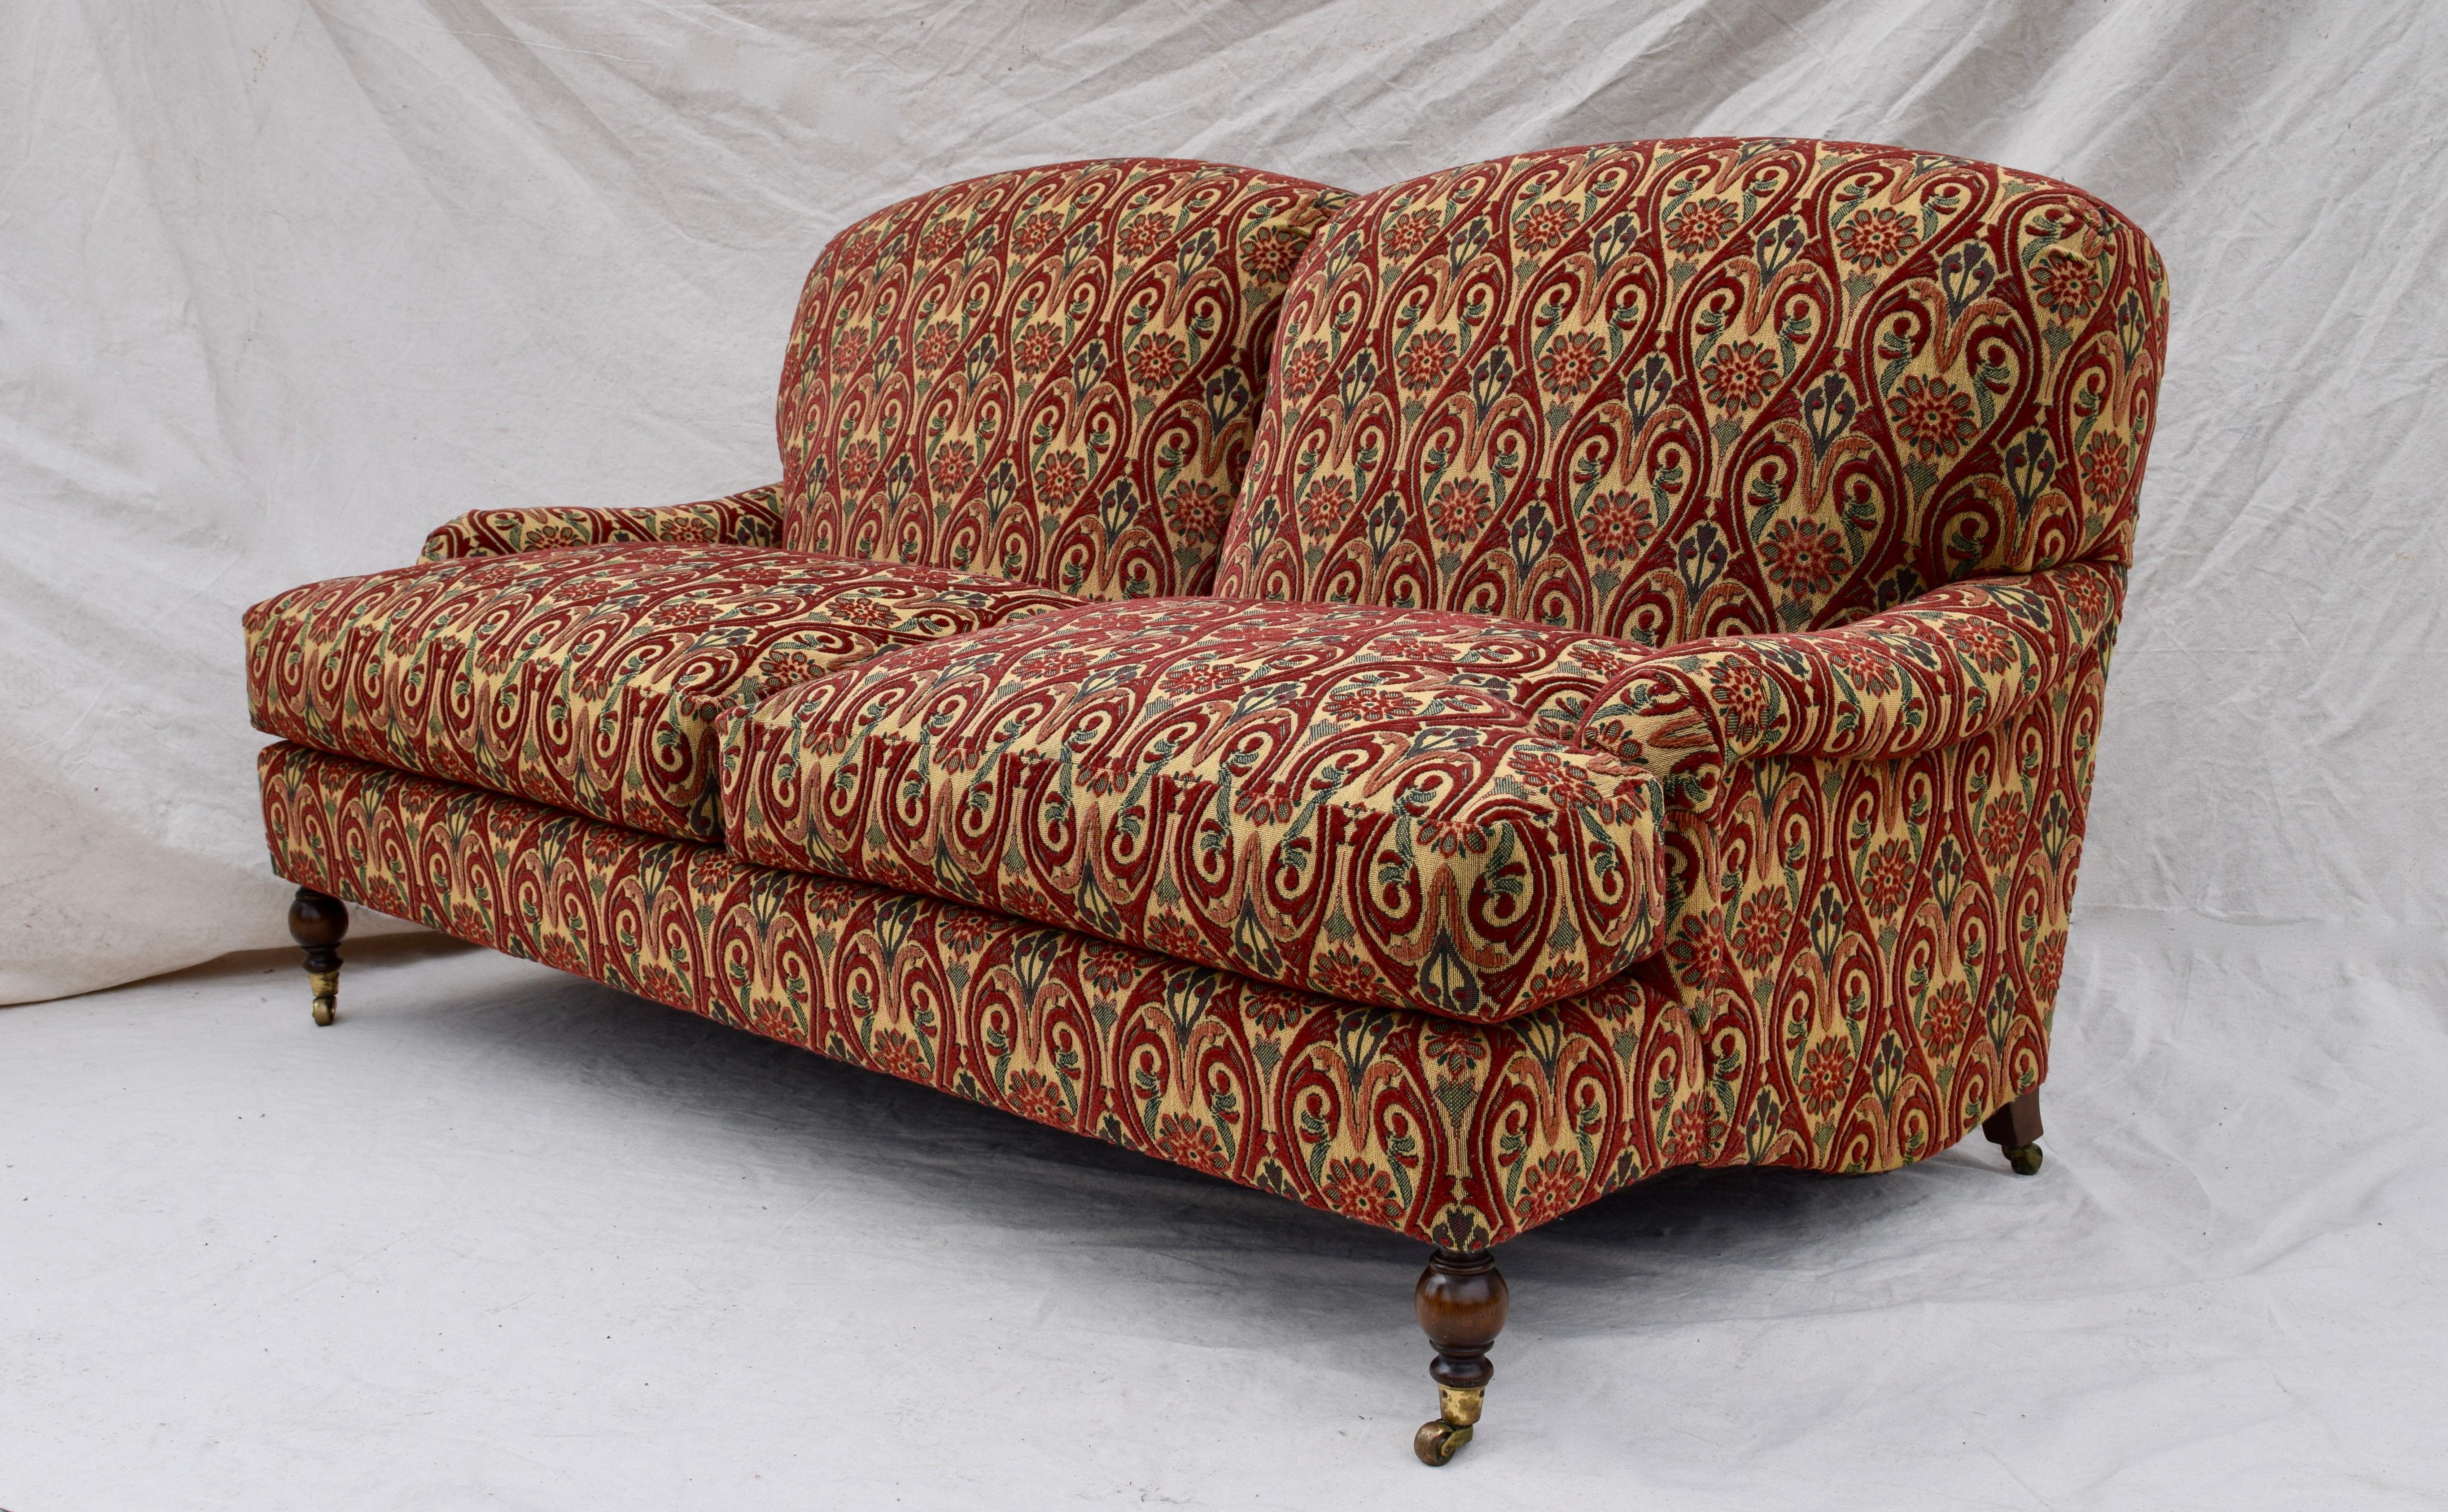 Luxurious two-seat sofa upholstered in lushly textured needlepoint tapestry style B & F fabric. Rolled arms, generously filled goose down cushions with turned mahogany front legs on brass castors are among many exceptional features offering an